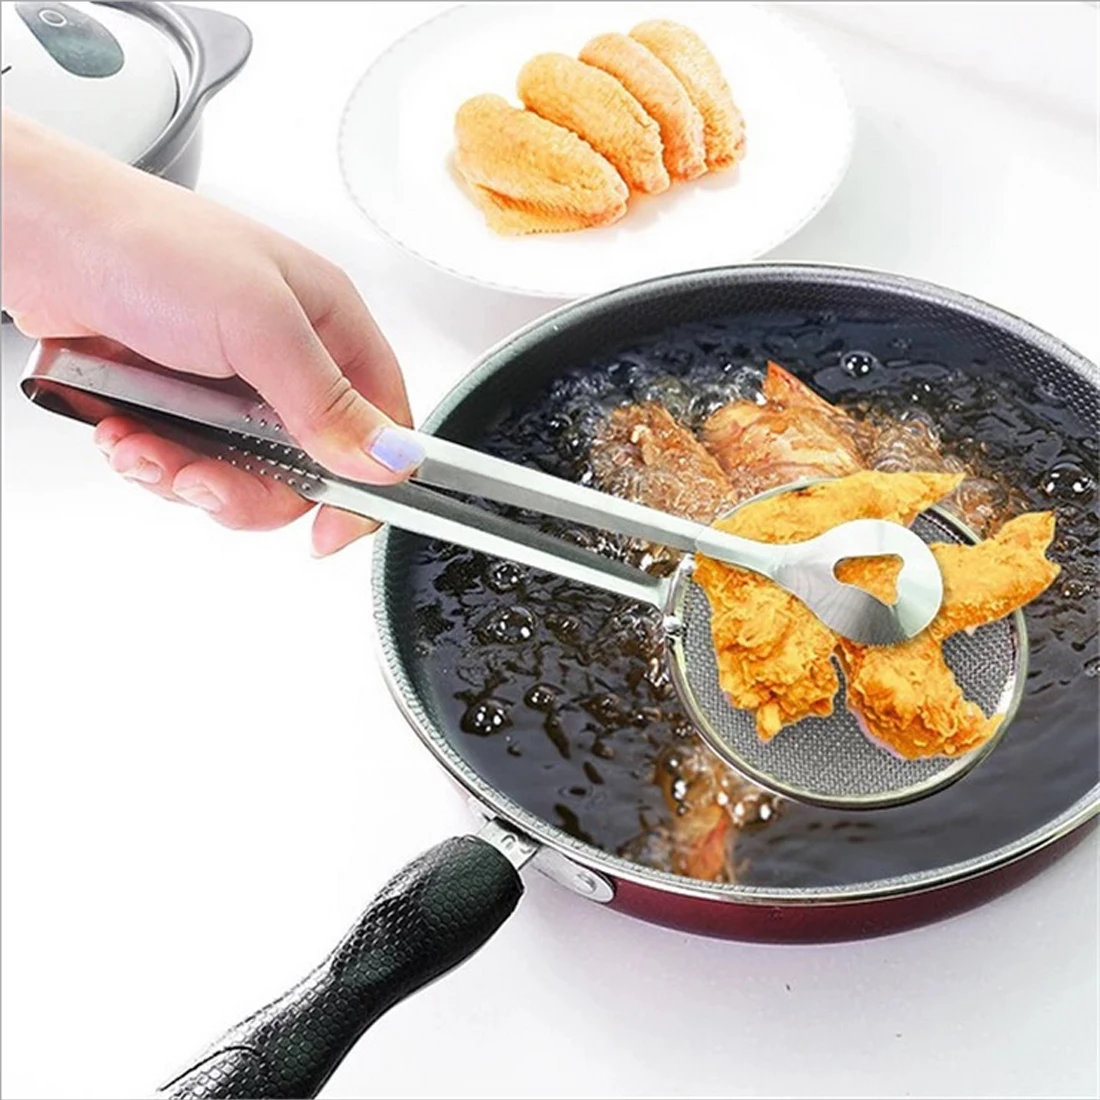 

Cooking Serving Food Clip Tong Stainless Steel Drain Oil Fried Food Strainer BBQ Salad Buffet Tool Kitchen Frying Mesh Colander